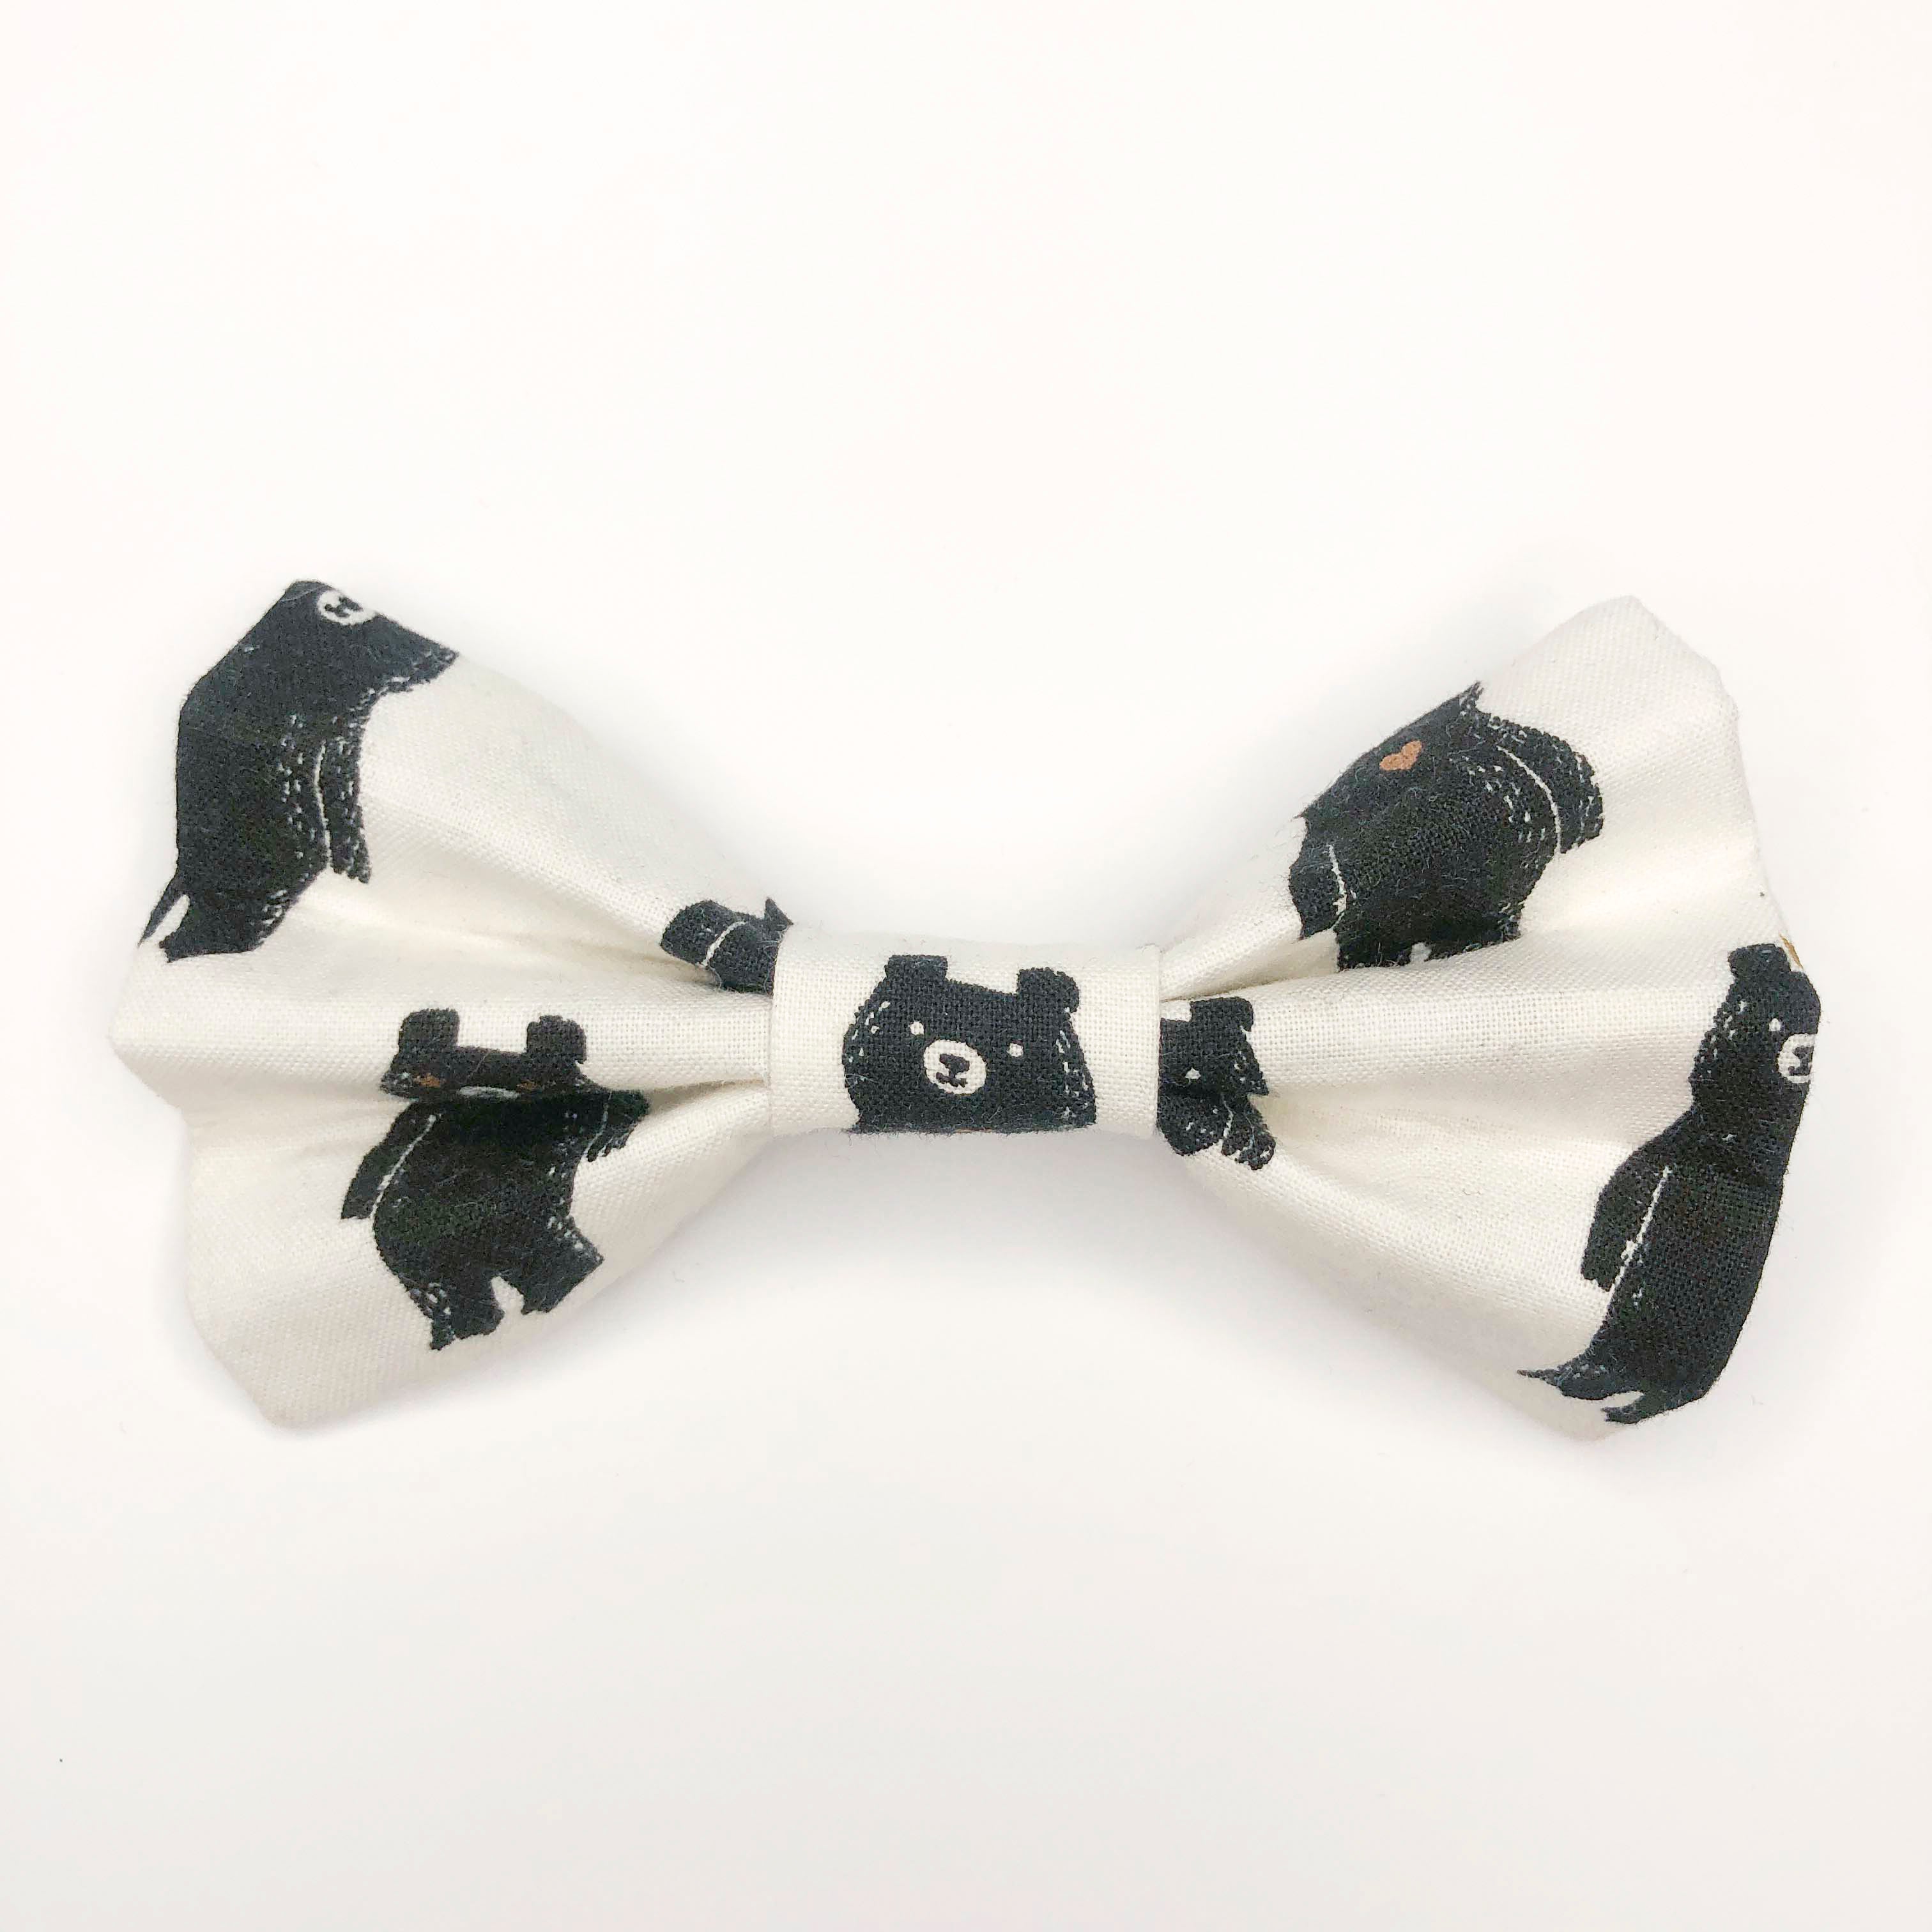 Quality bow tie made for large dogs, dogs with long fur, and little dogs looking to make a bold statement.  Each bow tie is made with quality quilting cotton and stiff interfacing with two loops of elastic. The two elastic loops to prevent bow tie drooping and fits tightly over a standard 1” wide dog collar.  Bow tie Length 5“". Height 3.5".  Elastic fits 1” collar.  Lora Lynn Design